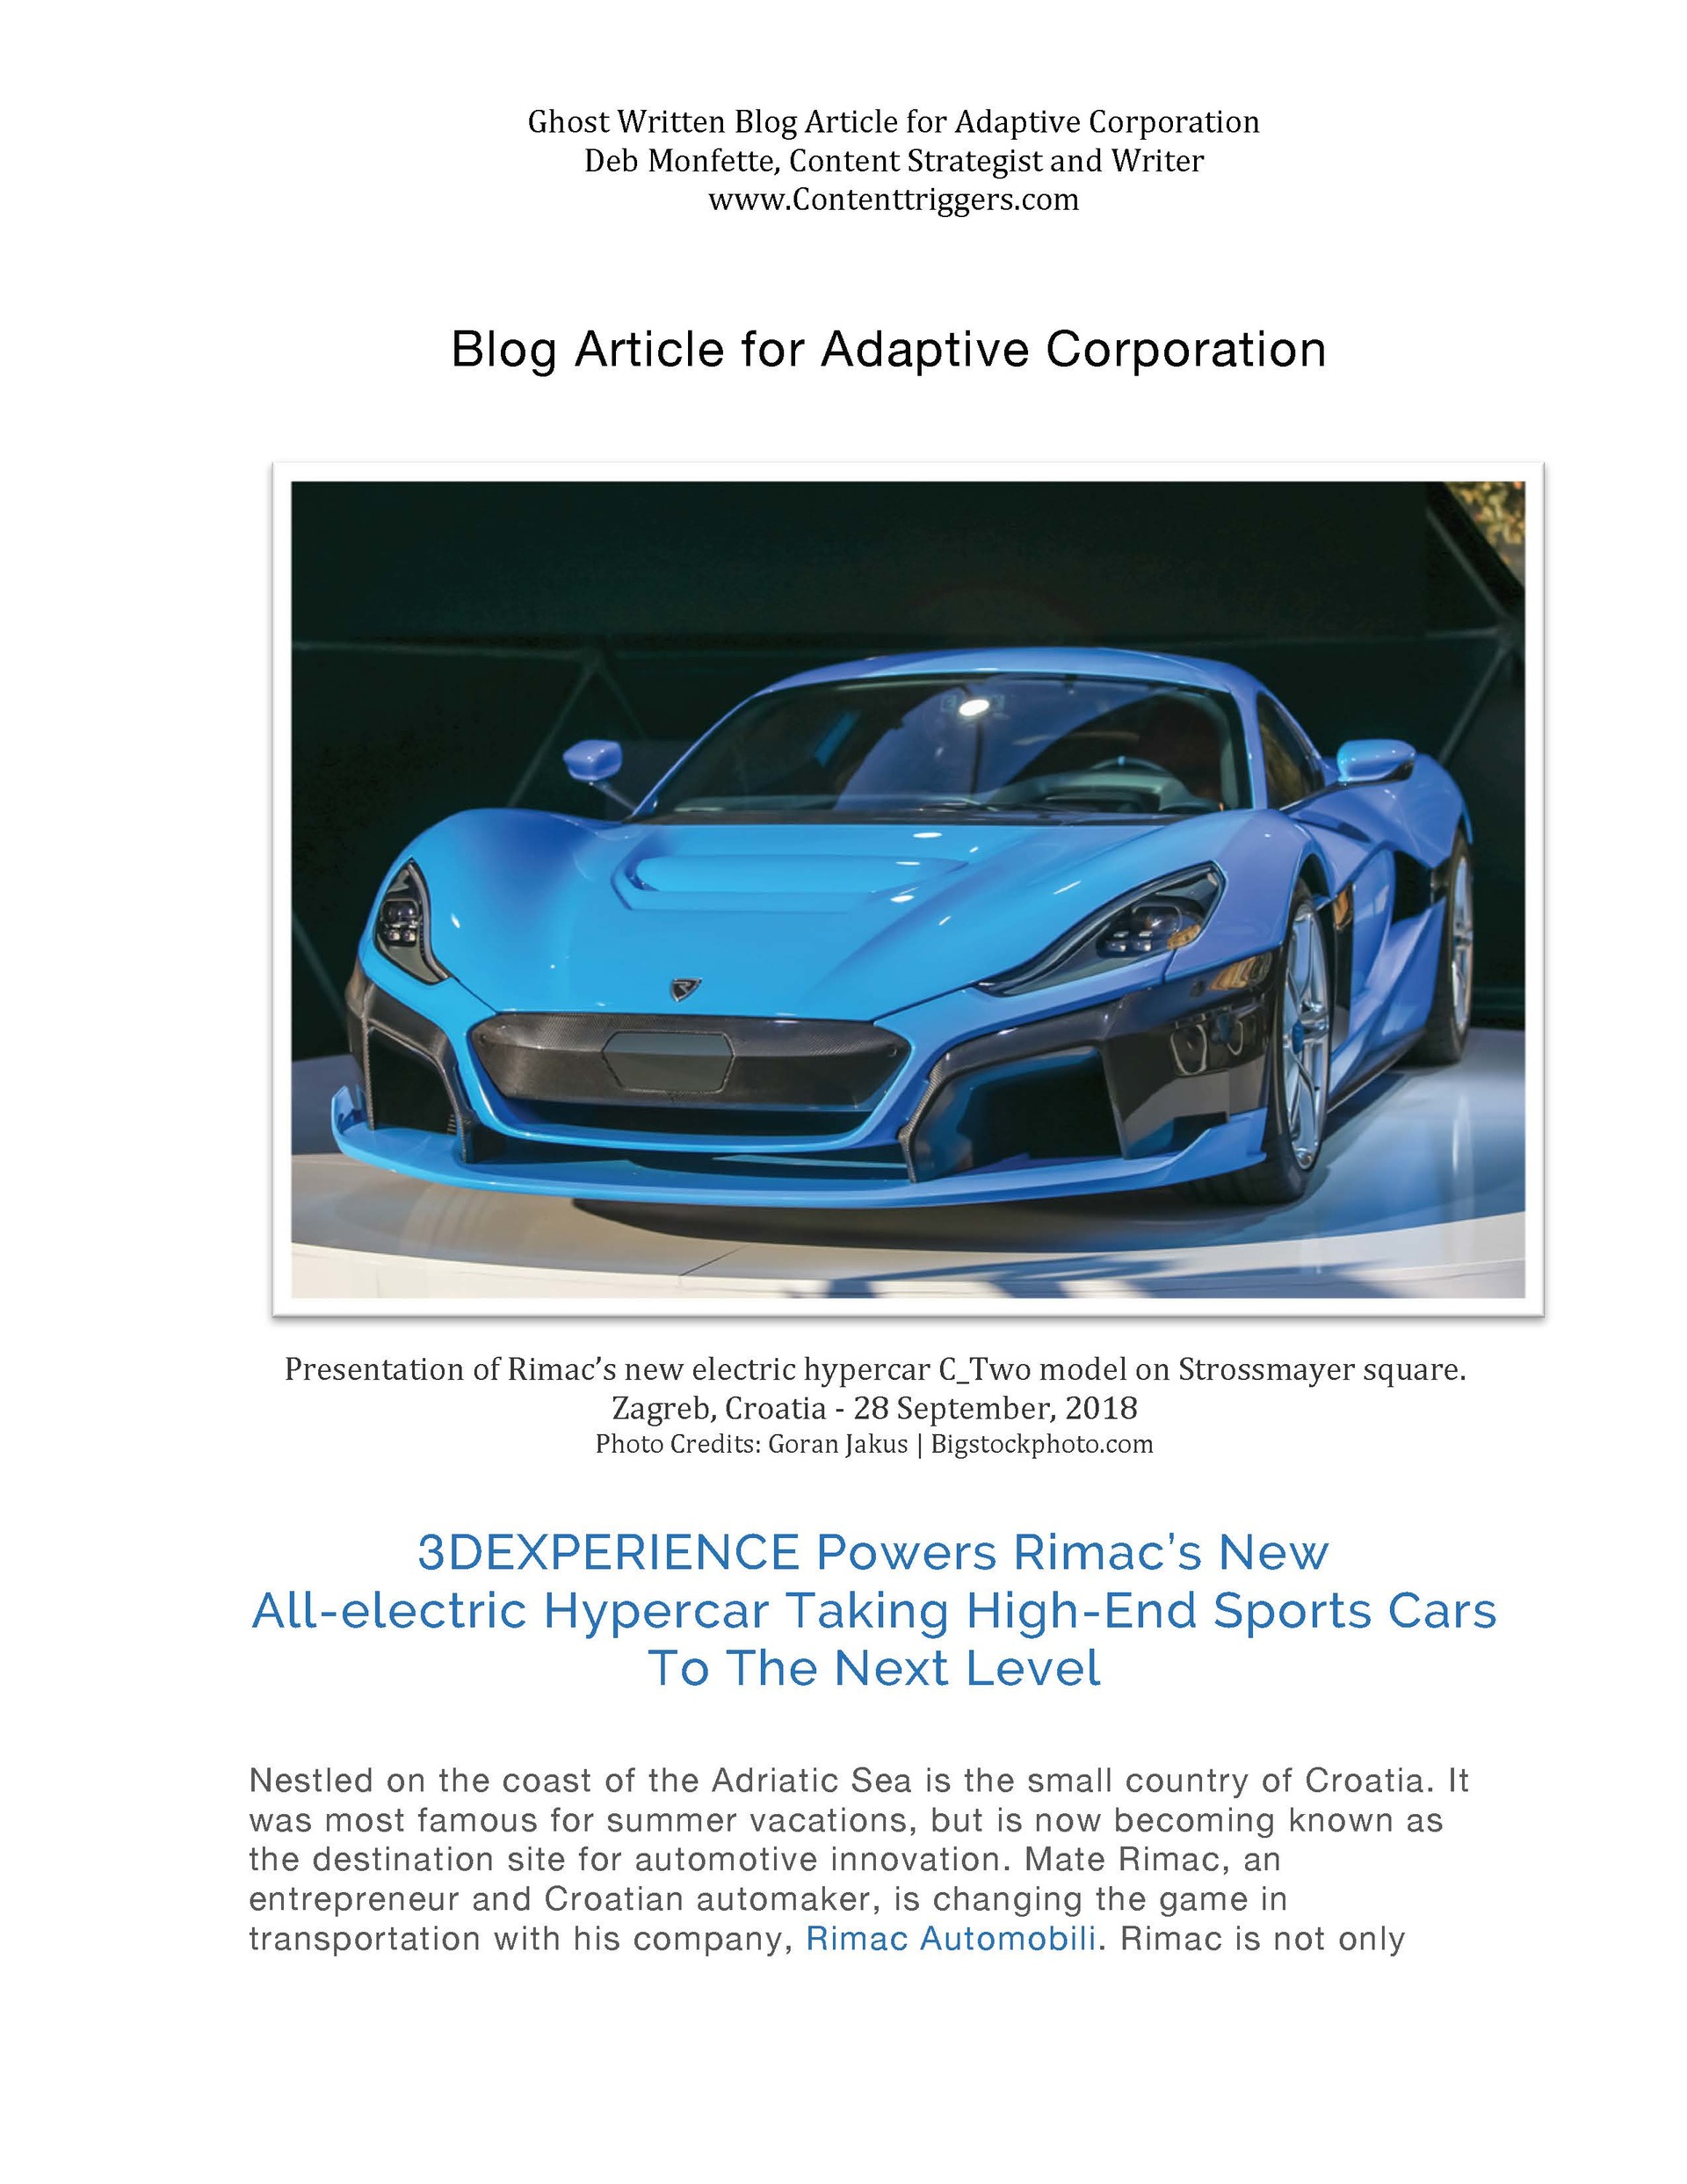 Rimac's New All-Electric Hypercar in Blue